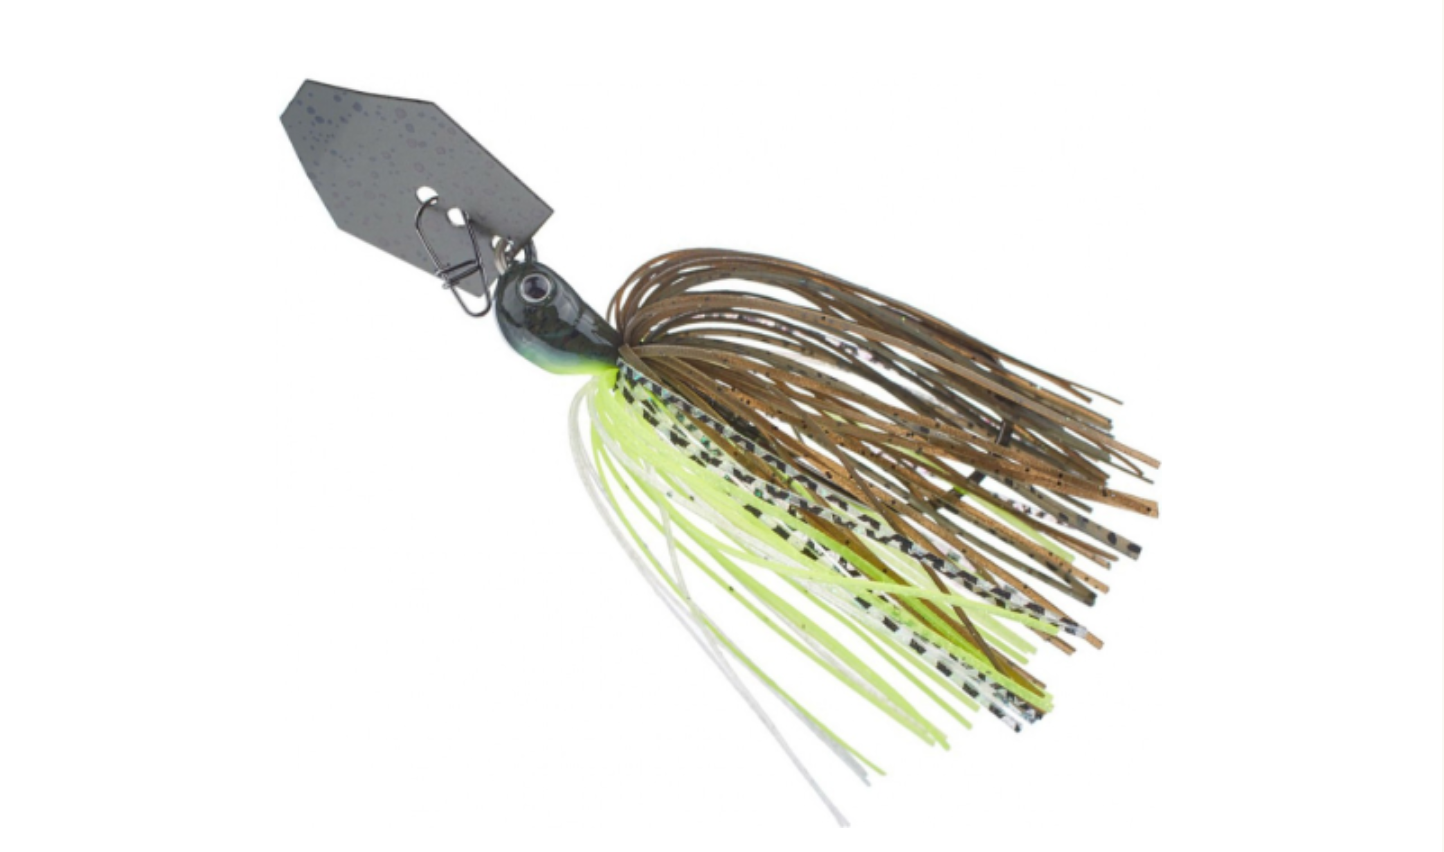 Chatterbait what size 1/4, 3/8, 1/2 - Fishing Tackle - Bass Fishing Forums